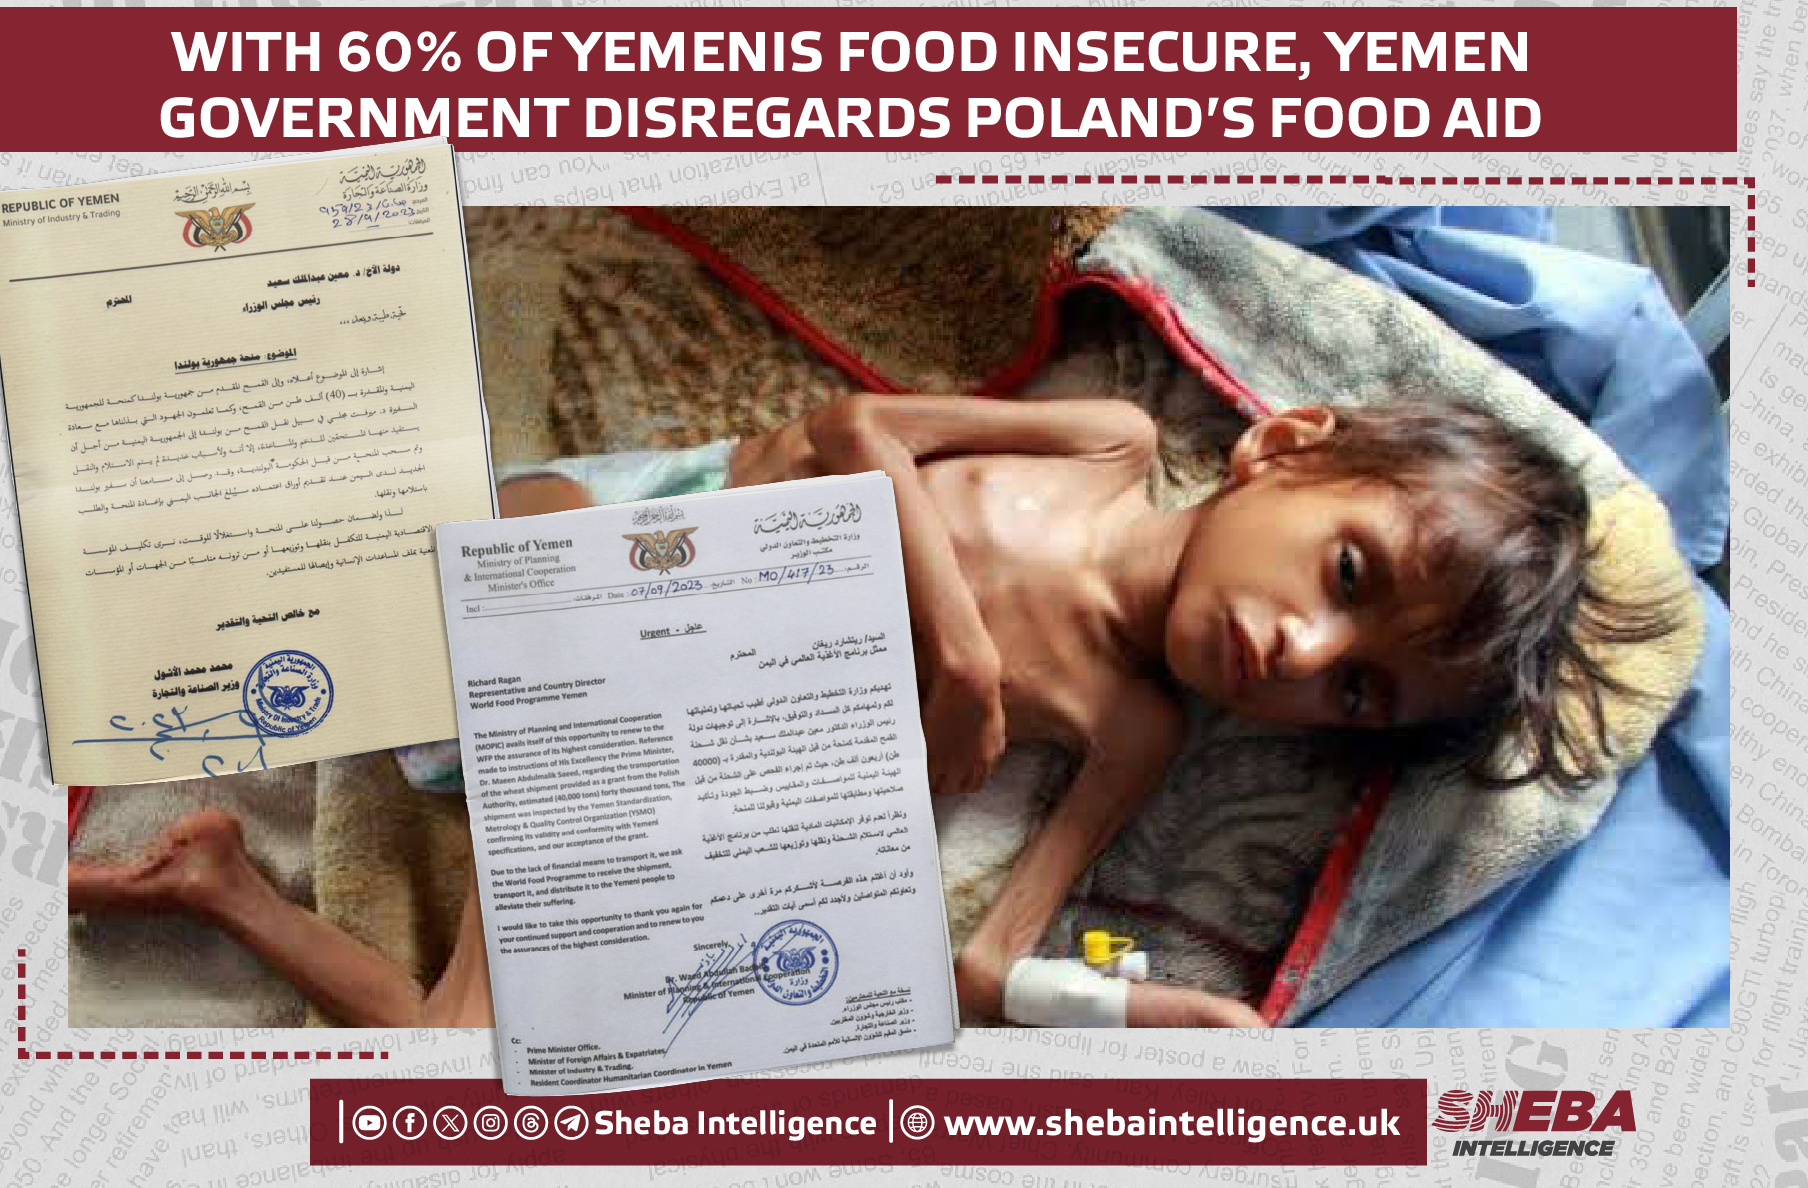 With 60% of Yemenis Food Insecure, Yemen Government Disregards Poland's Food Aid